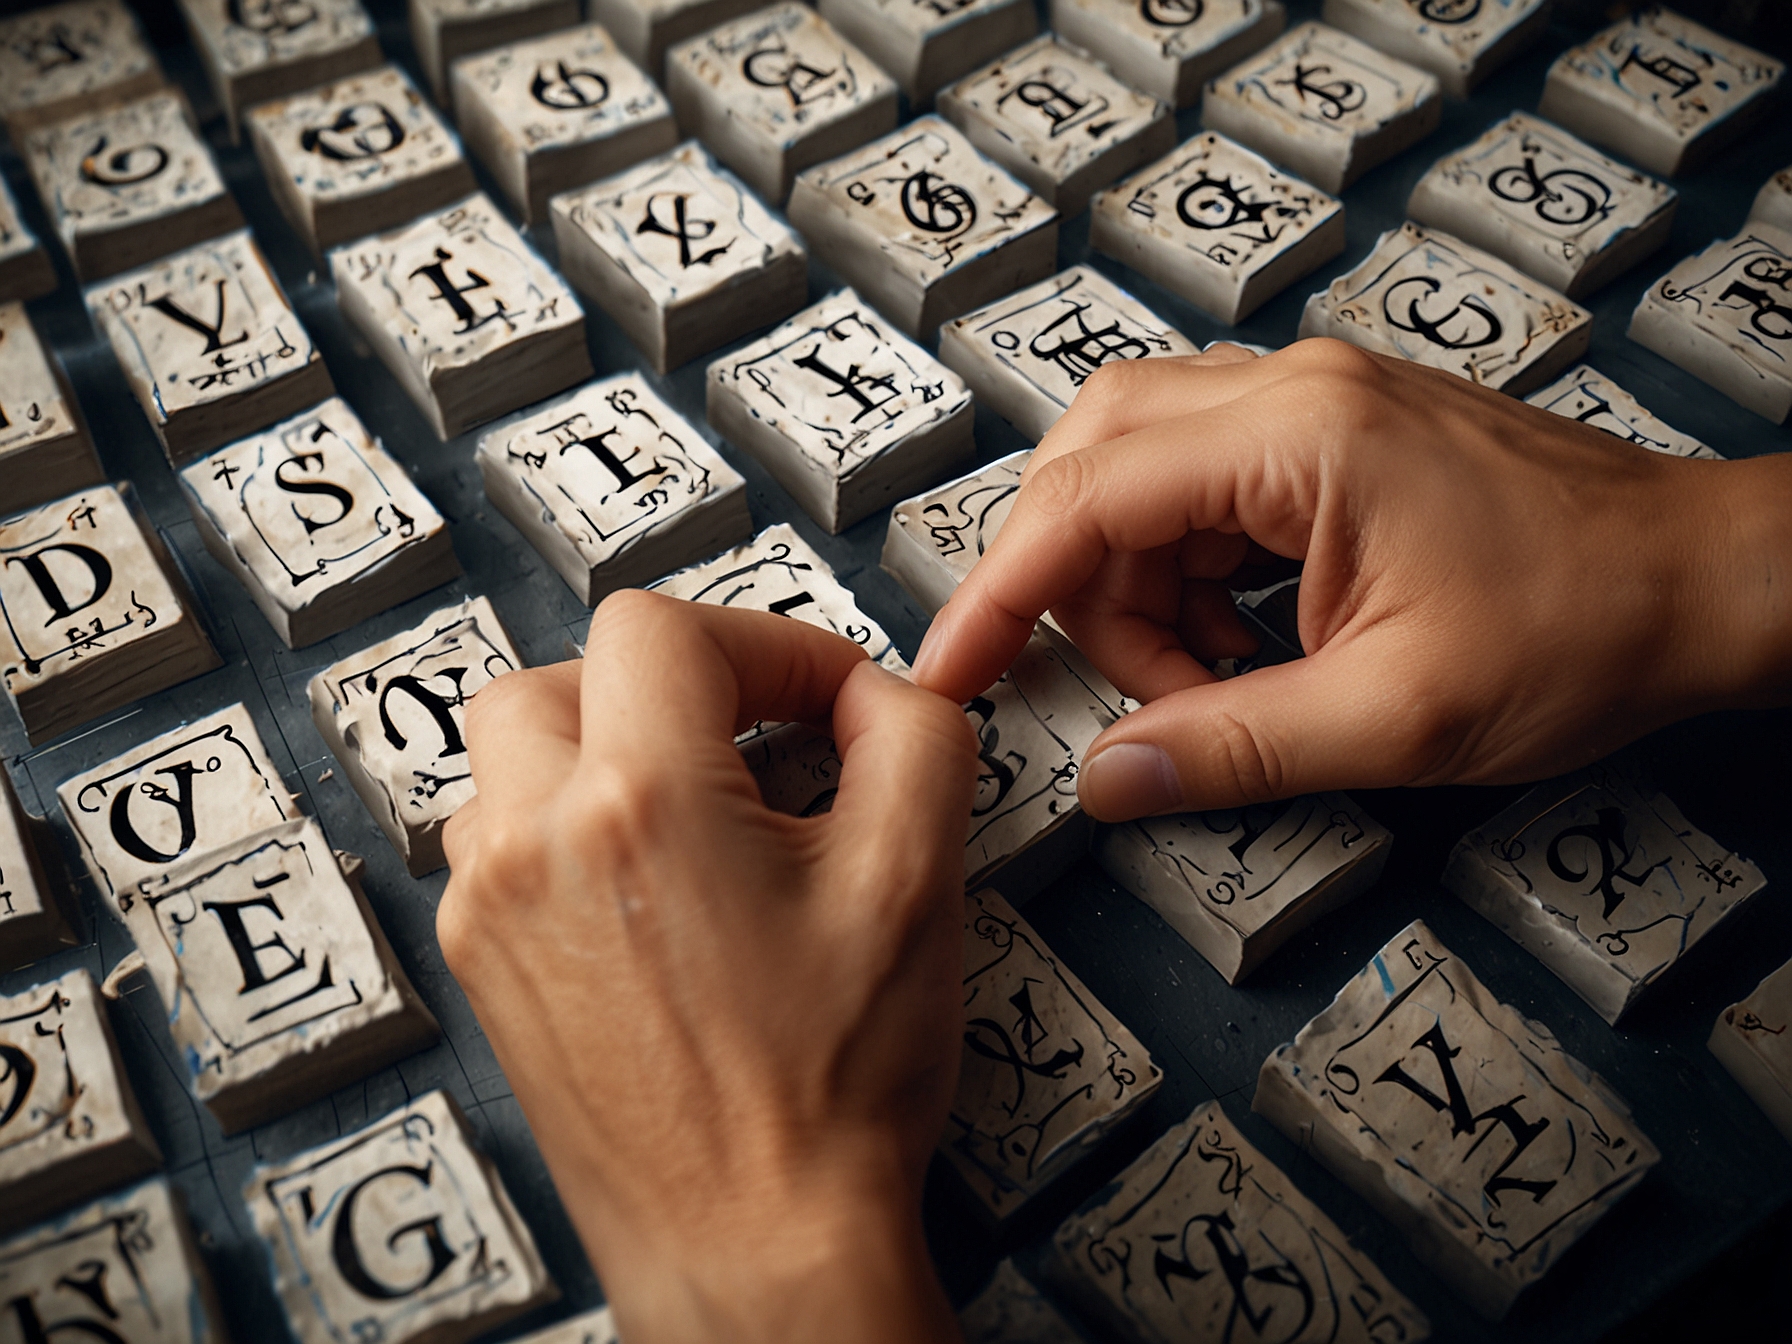 A close-up view of a player’s hands re-arranging letter tiles to discover new word combinations in the NYT Strands game. This action emphasizes the strategy of shuffling letters to find hidden words.